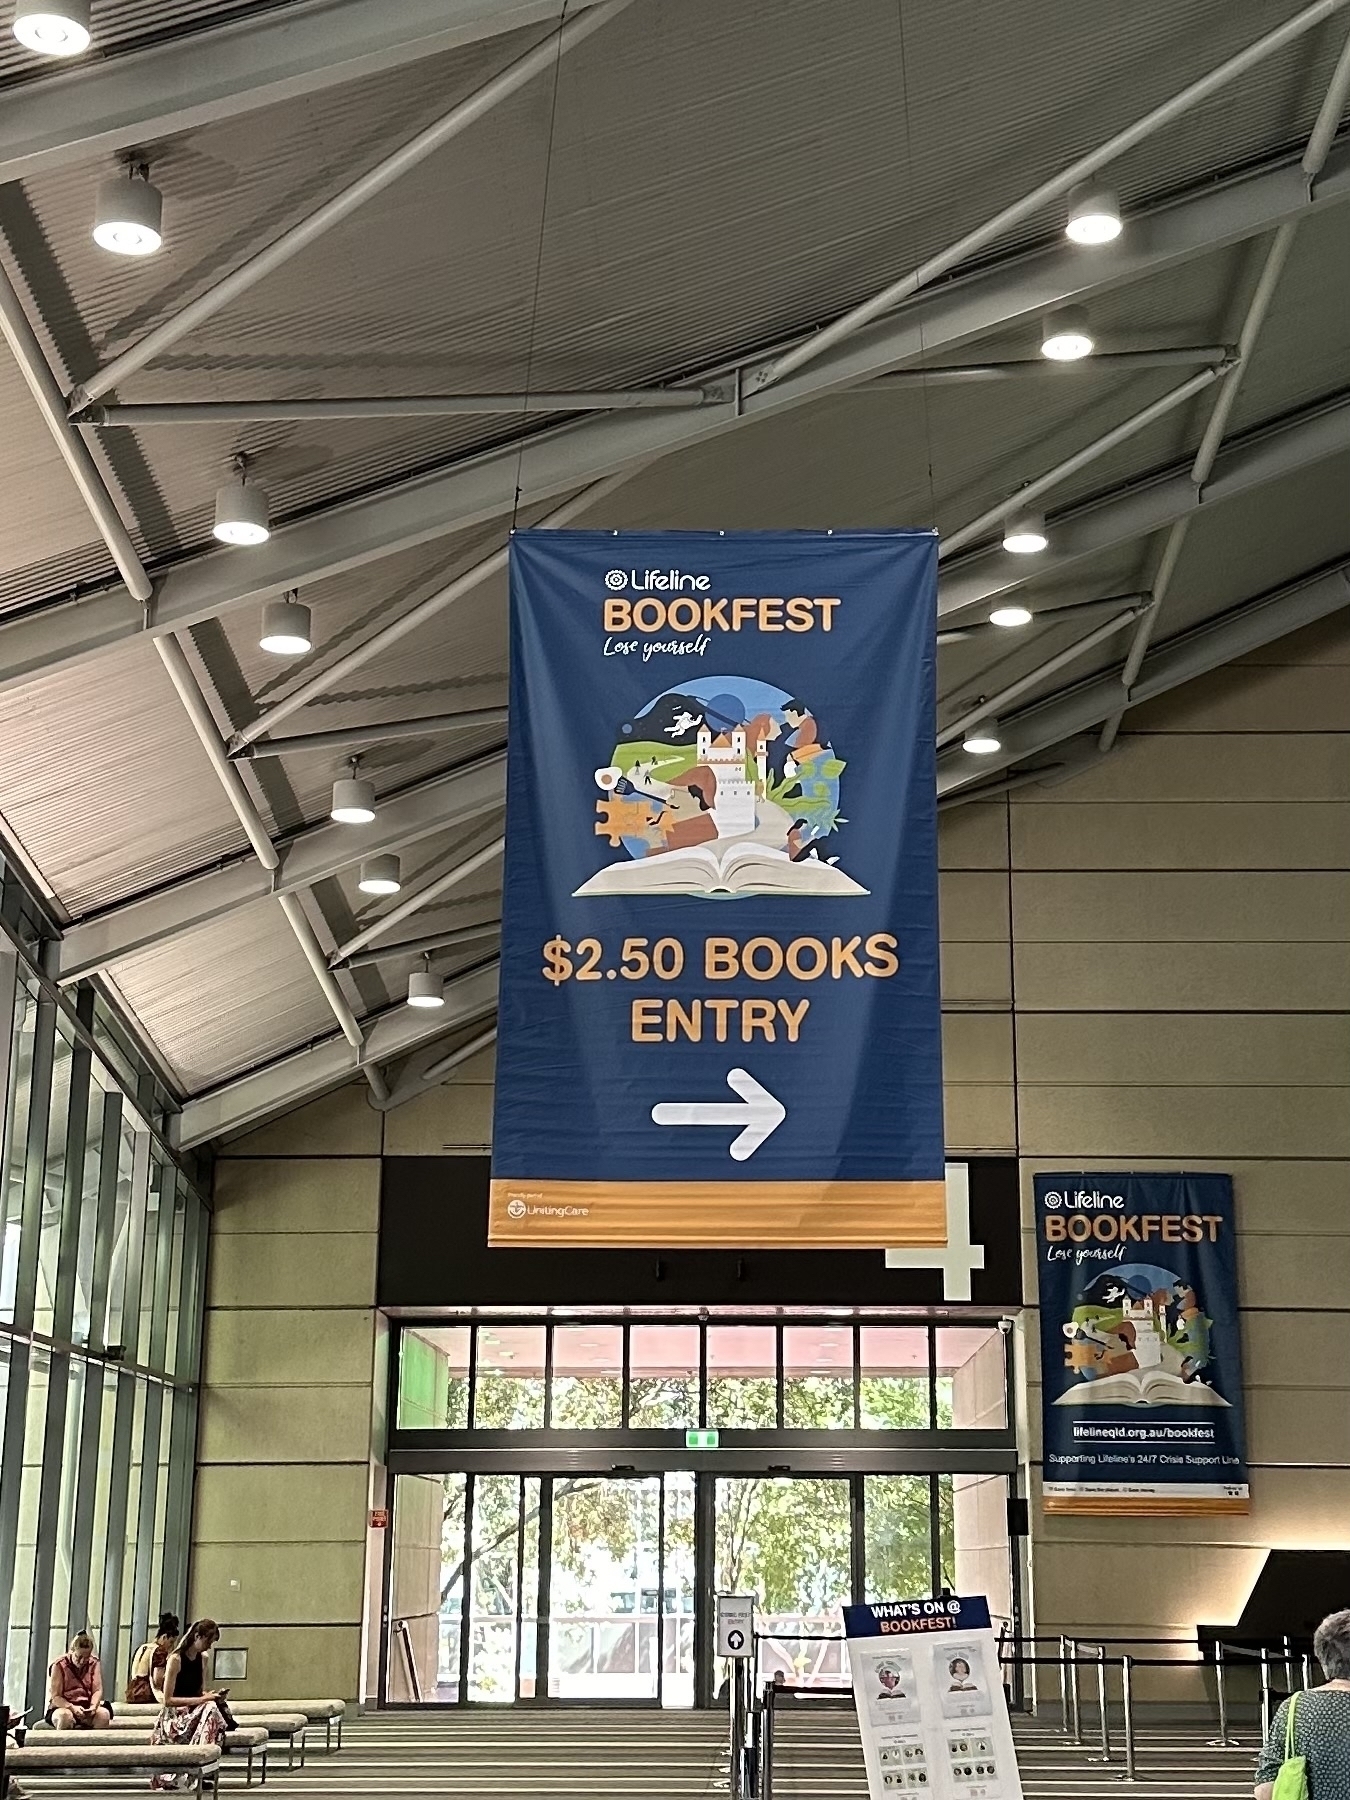 A large blue banner hanging from the ceiling of a convention centre. The banner has “Lifeline Bookfest. $2.50 books entry” and an arrow pointing right.